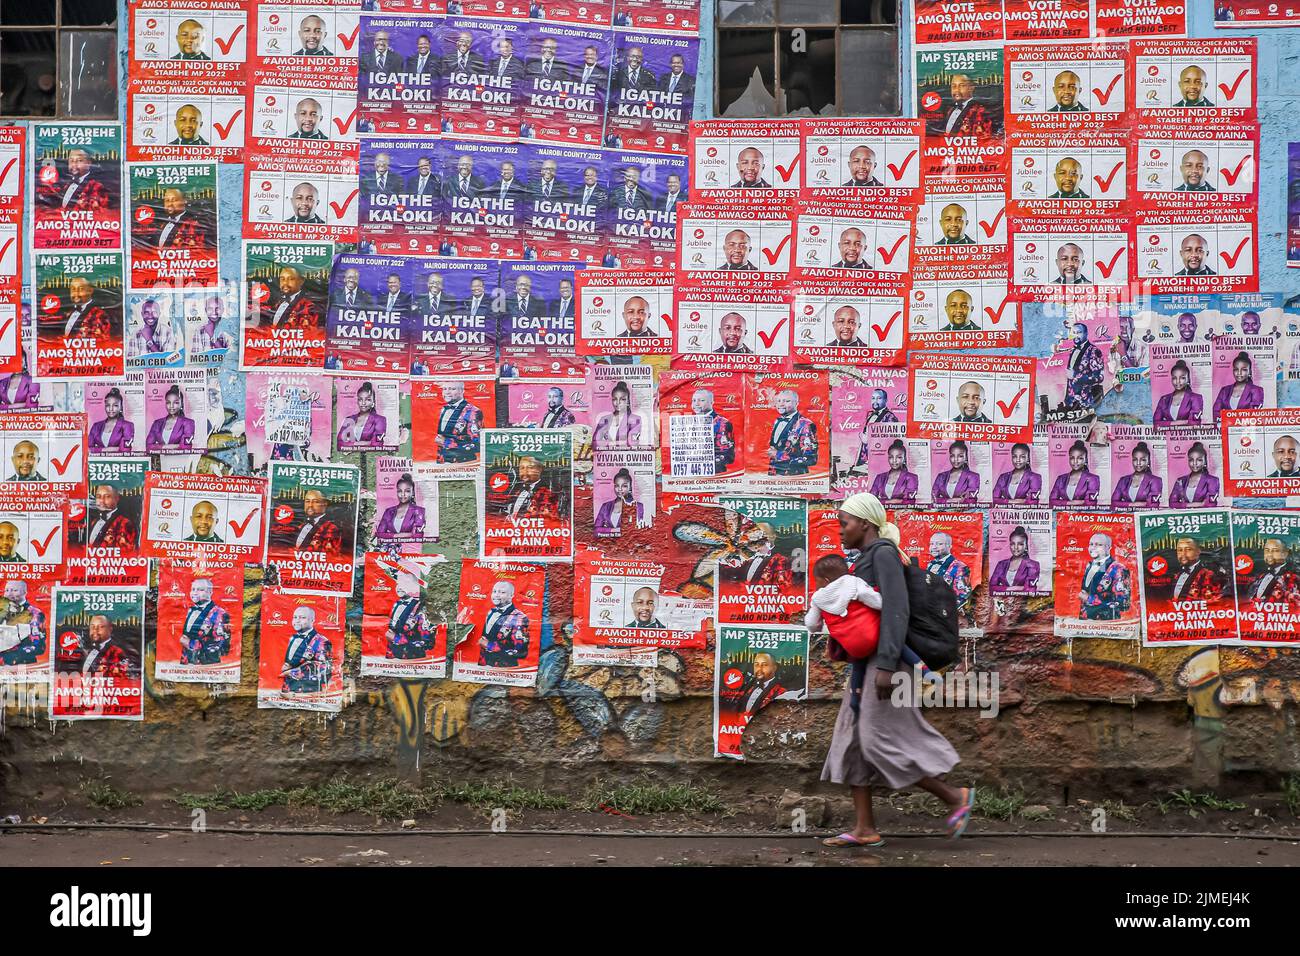 Nairobi, Kenya. 3rd Aug, 2022. A woman carries her child as she walks past political campaign posters along Haile Selassie avenue in Nairobi, as Kenyans prepare to vote on the 9th August 2022 general elections. Politicians continue to campaign in different parts of the country to seek votes from Kenyans. Political campaign billboards, posters, branded cars, umbrellas, tshirts and banners are seen everywhere general elections campaign. Kenyans will head to the polls on August 9, 2022, to elect a new president, as well as members of the National Assembly and Senate, county governors, county wom Stock Photo